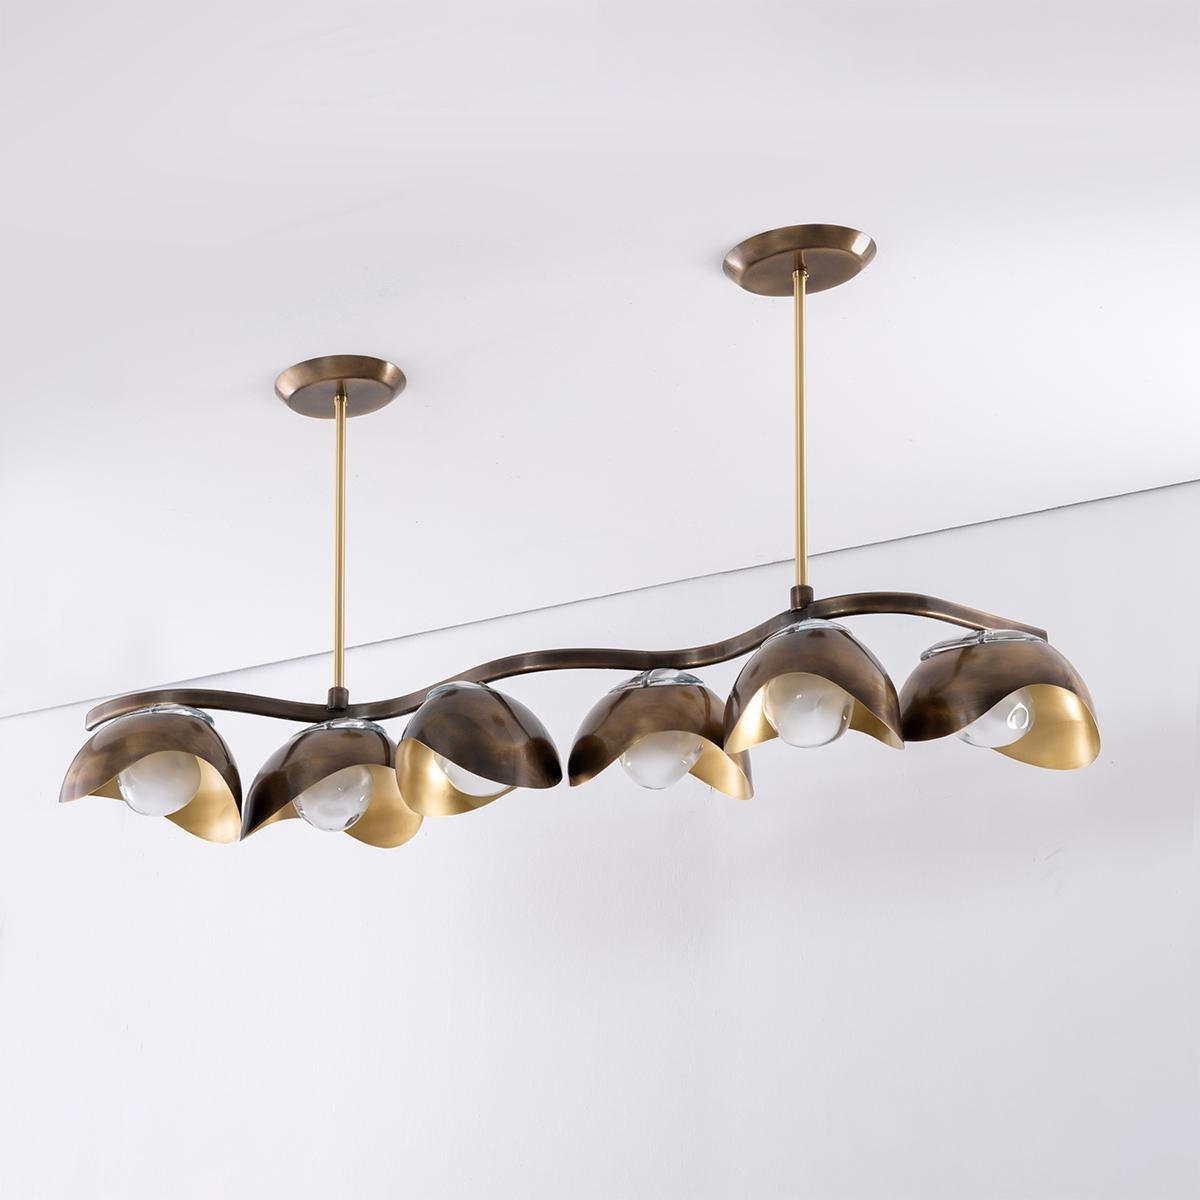 Contemporary Serpente Ceiling Light by Gaspare Asaro- Polished Nickel and Satin Brass Finish For Sale